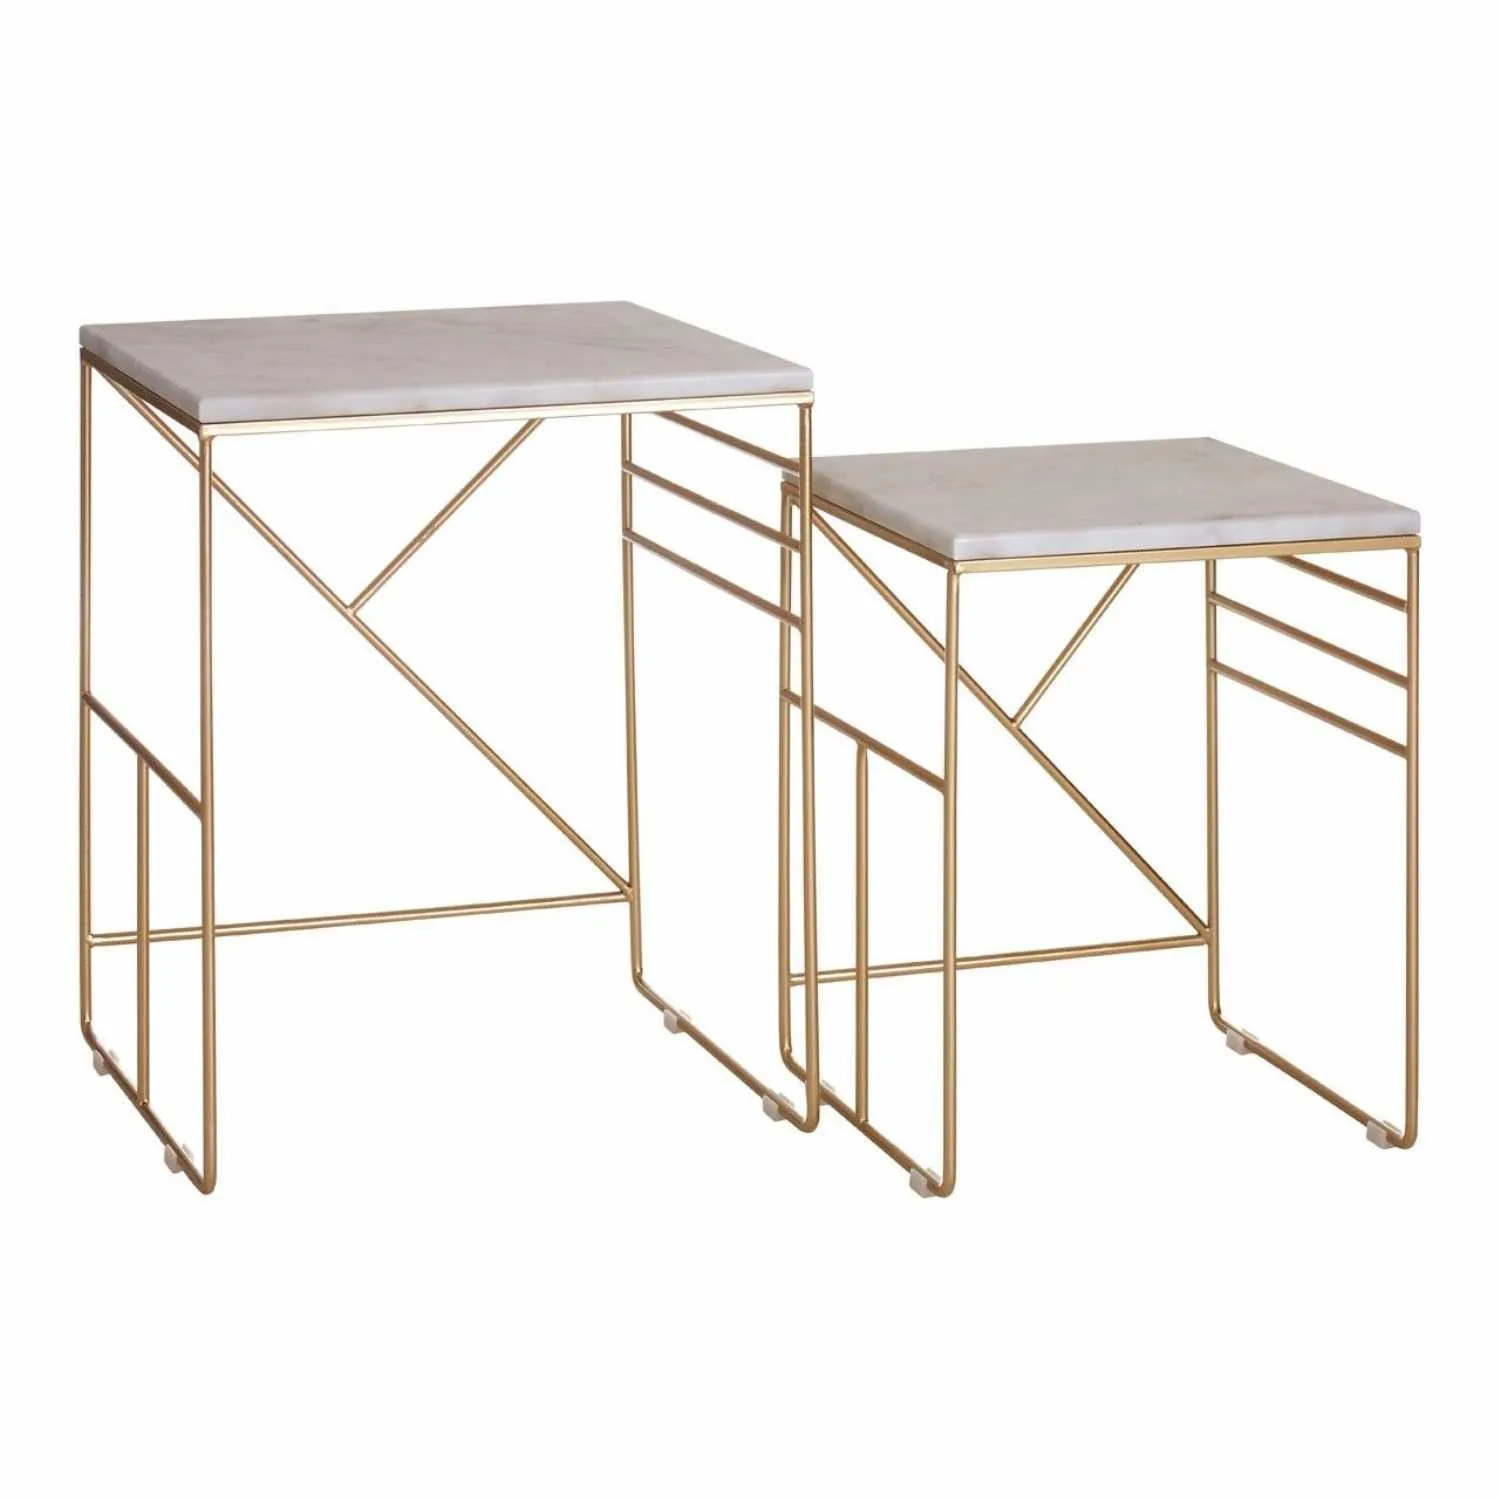 Avantis Set Of 2 Square White Marble And Champagne Iron Side Tables